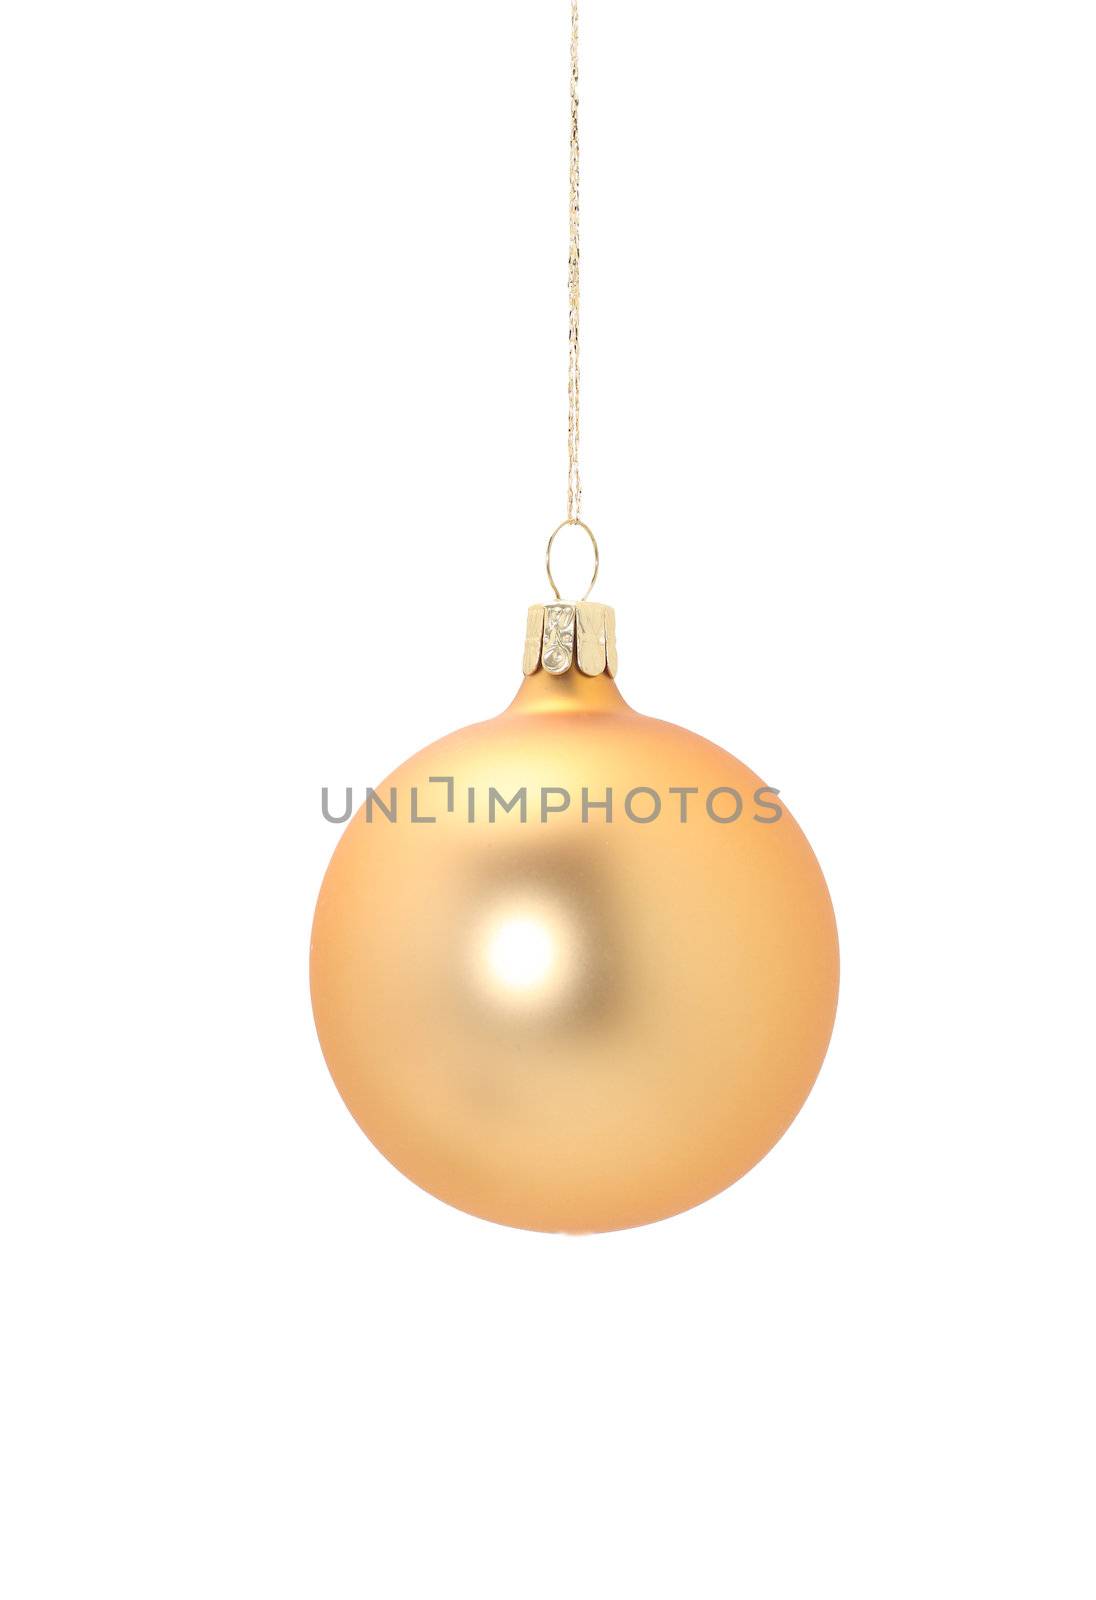 A gold christmas ball hanging from golden thread, shot in studio isolated on white. Perfect for your holiday designs or ads